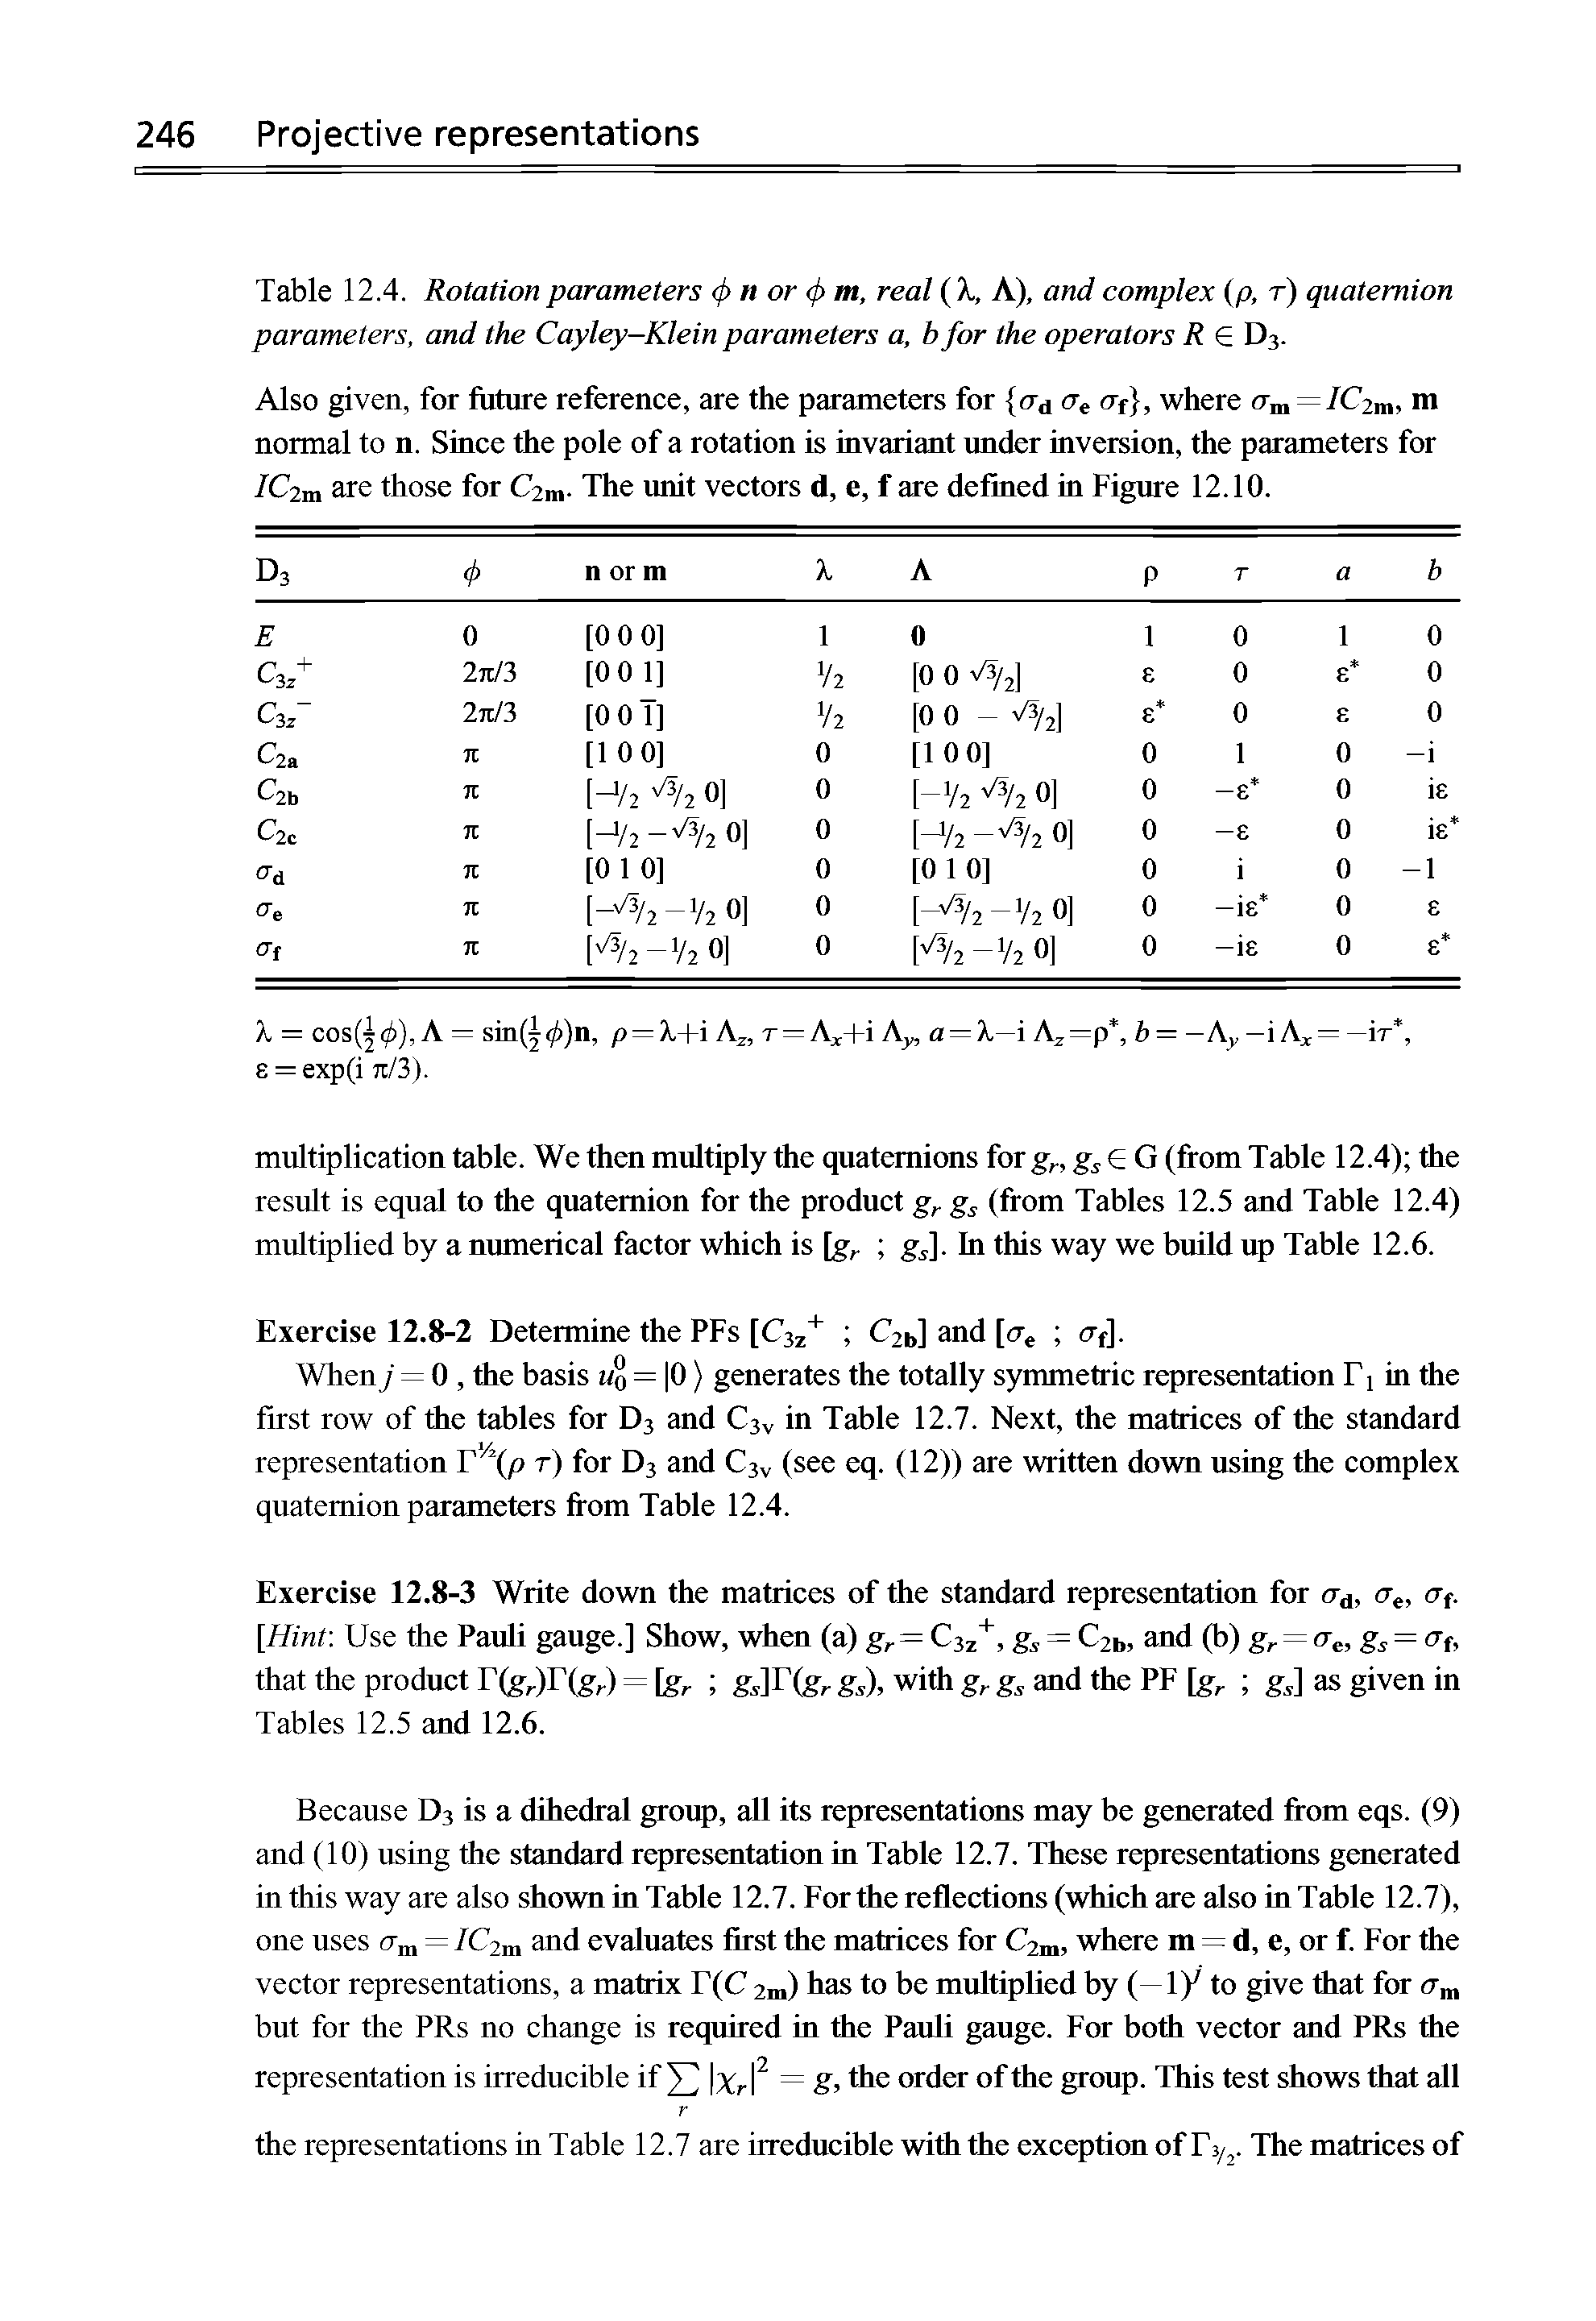 Table 12.4. Rotation parameters <j> n or <j> m, real (A, A), and complex (p, r) quaternion parameters, and the Cayley-Klein parameters a, b for the operators R D3.